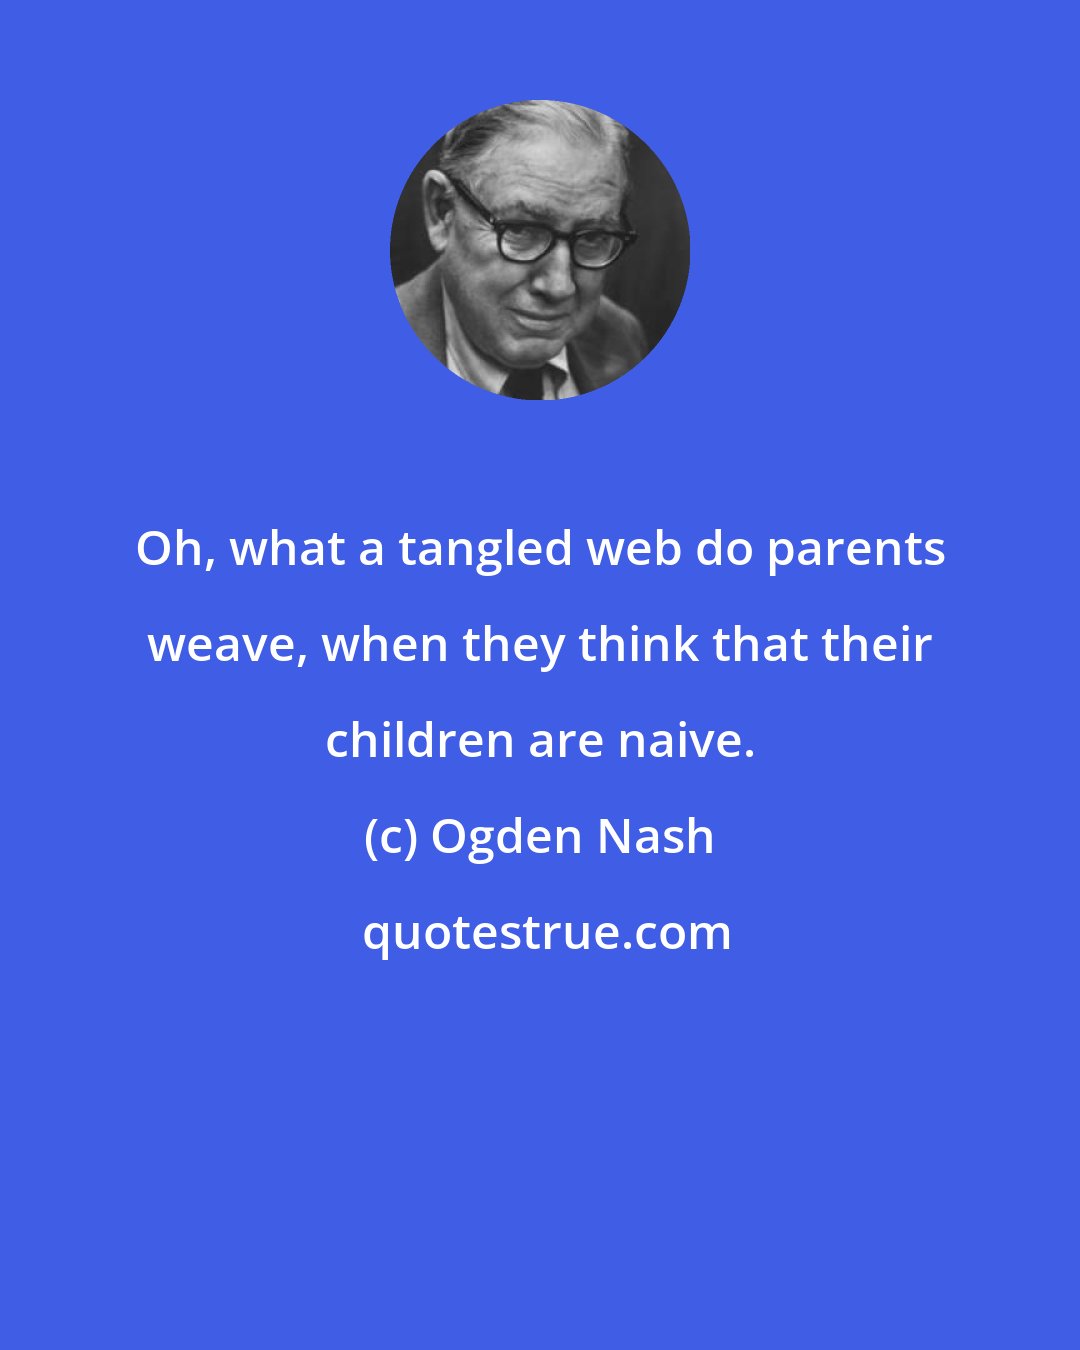 Ogden Nash: Oh, what a tangled web do parents weave, when they think that their children are naive.